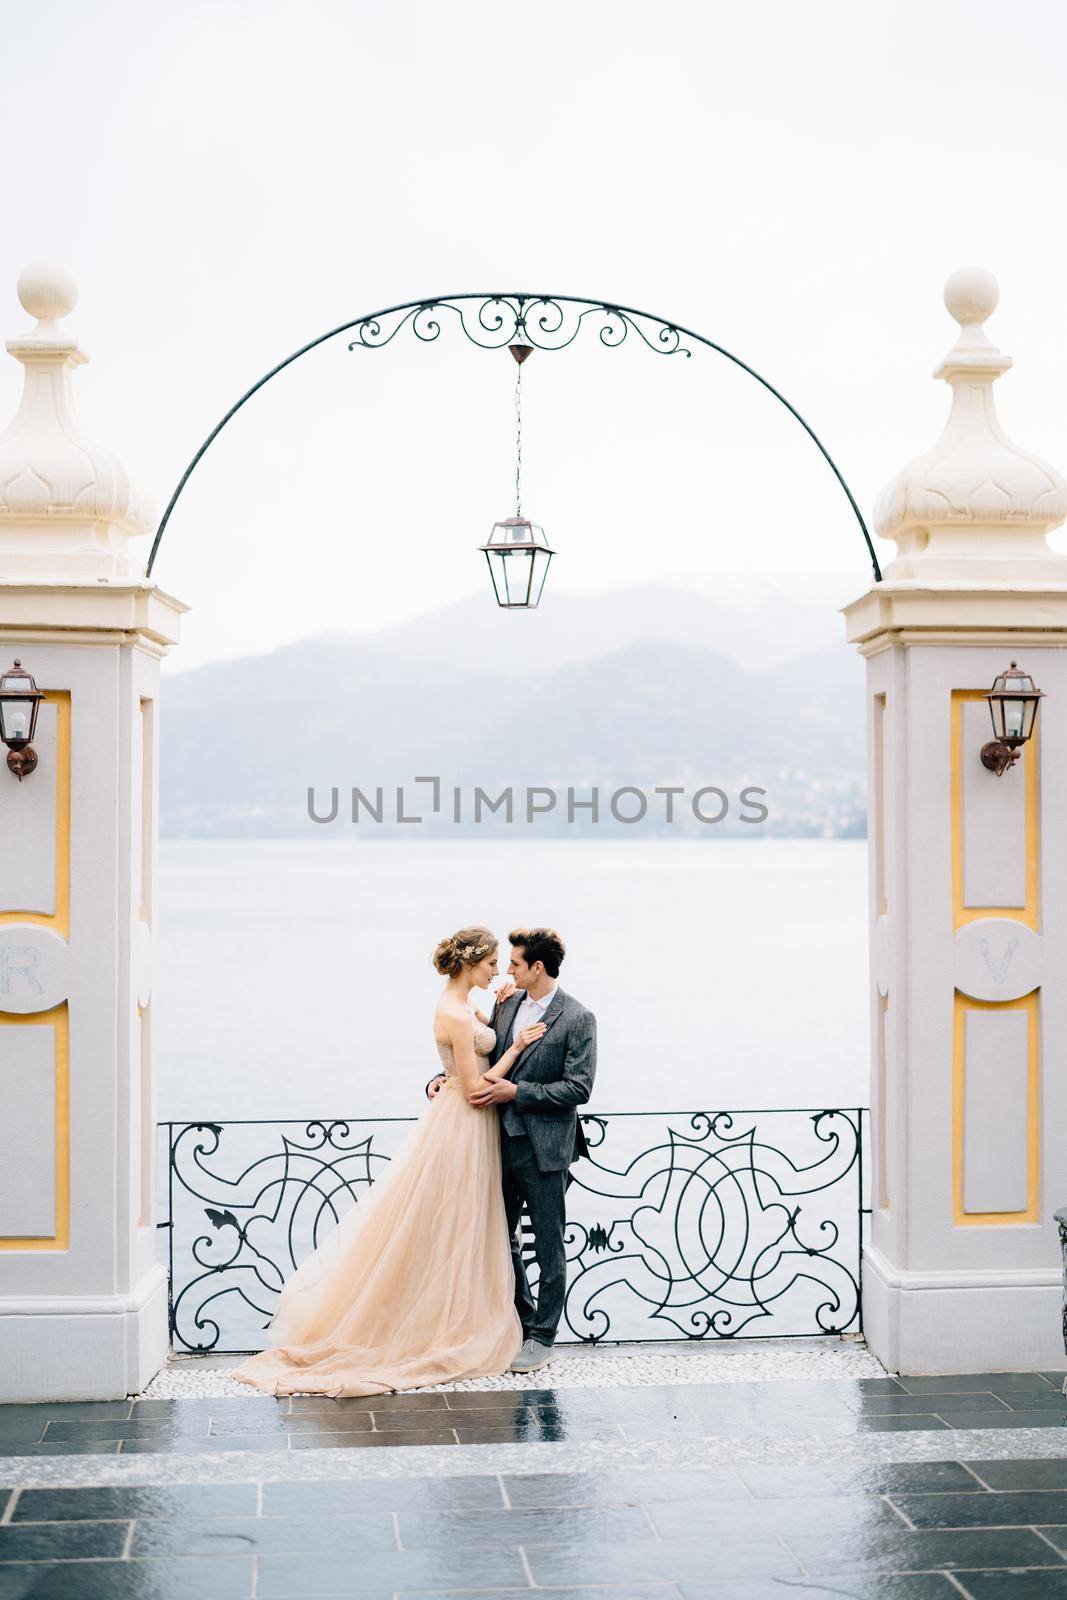 Newlyweds stand in an embrace under an ancient arch leaning on a forged fence against the backdrop of Lake Como. High quality photo